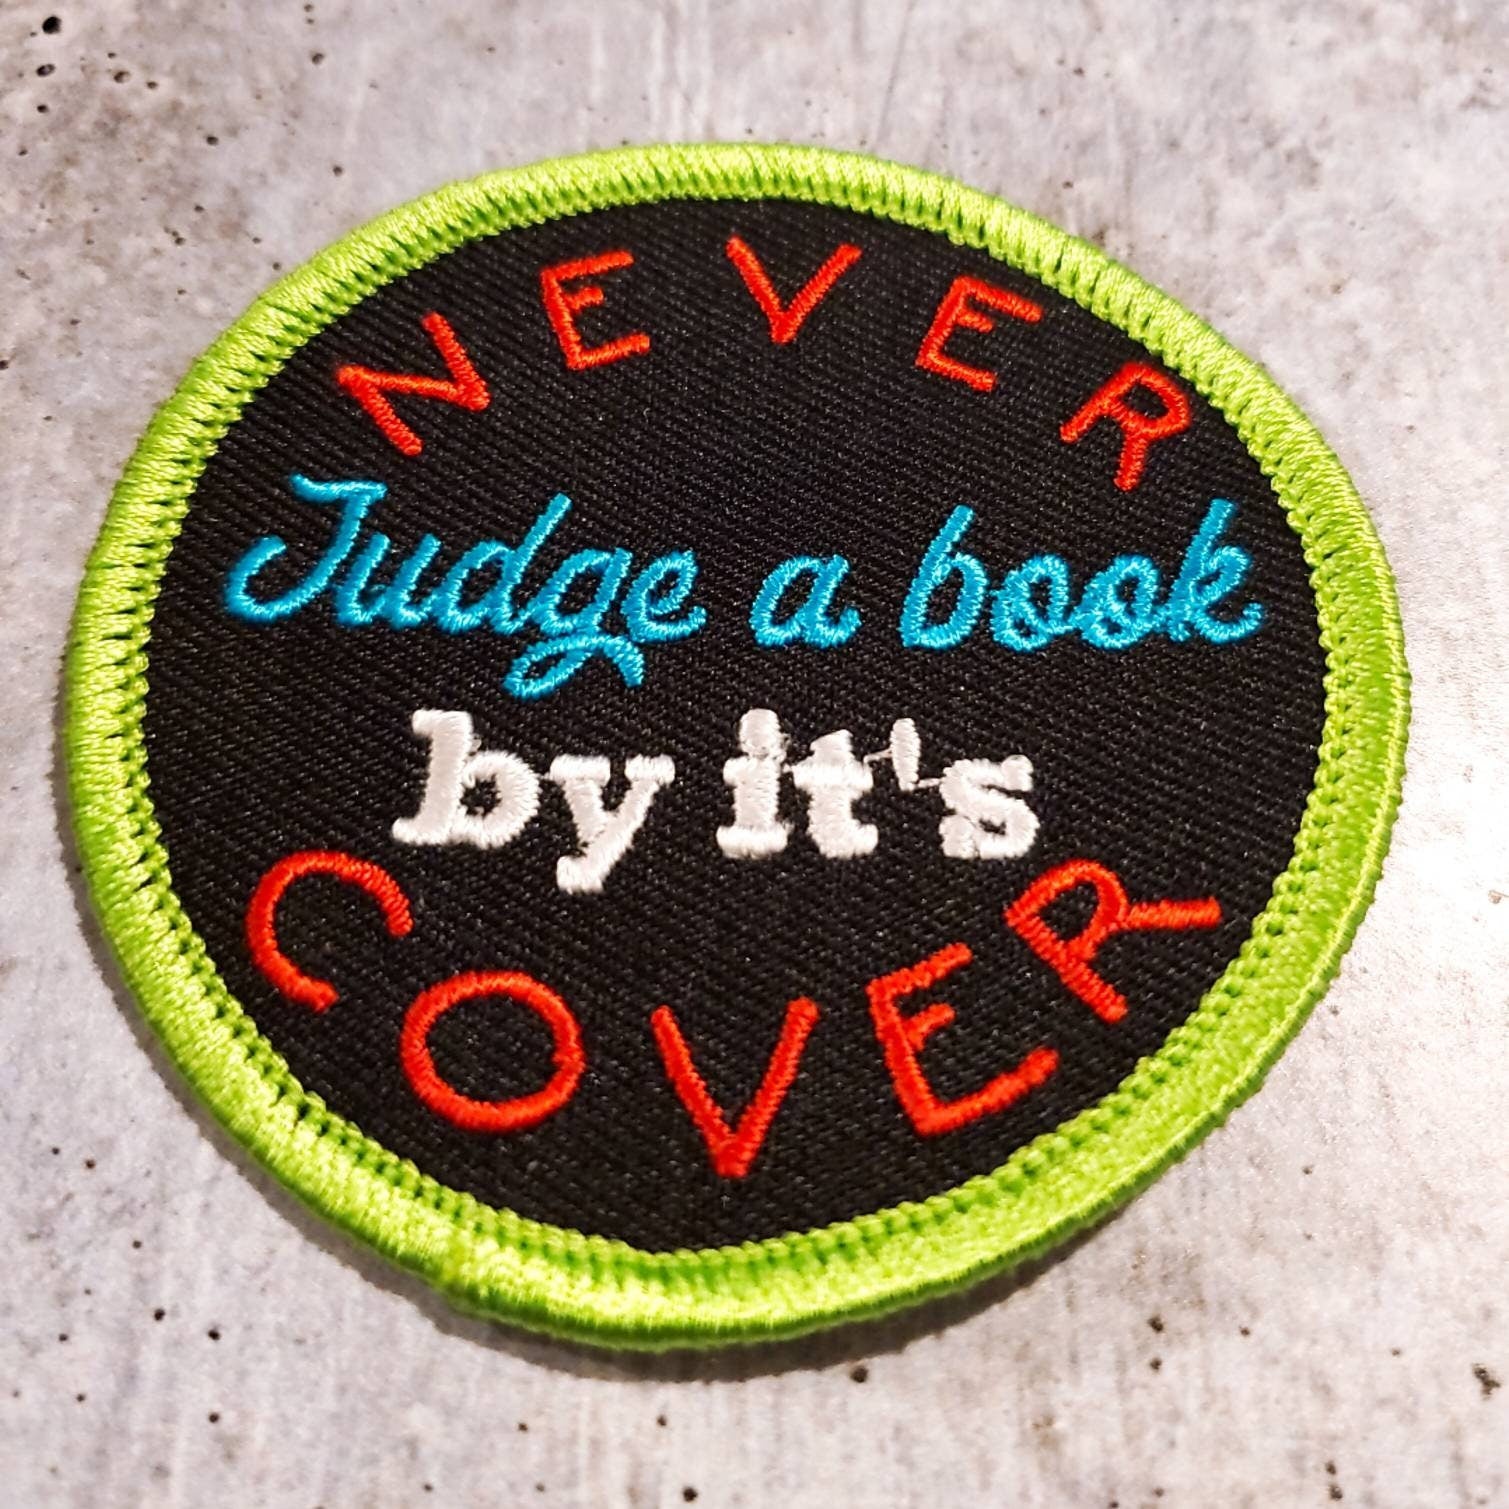 NEW Motivational Quote Patch, "Never Judge a Book" 2.75" inch, Inspirational Applique, Iron-on Embroidered Patch, Embroidery Design